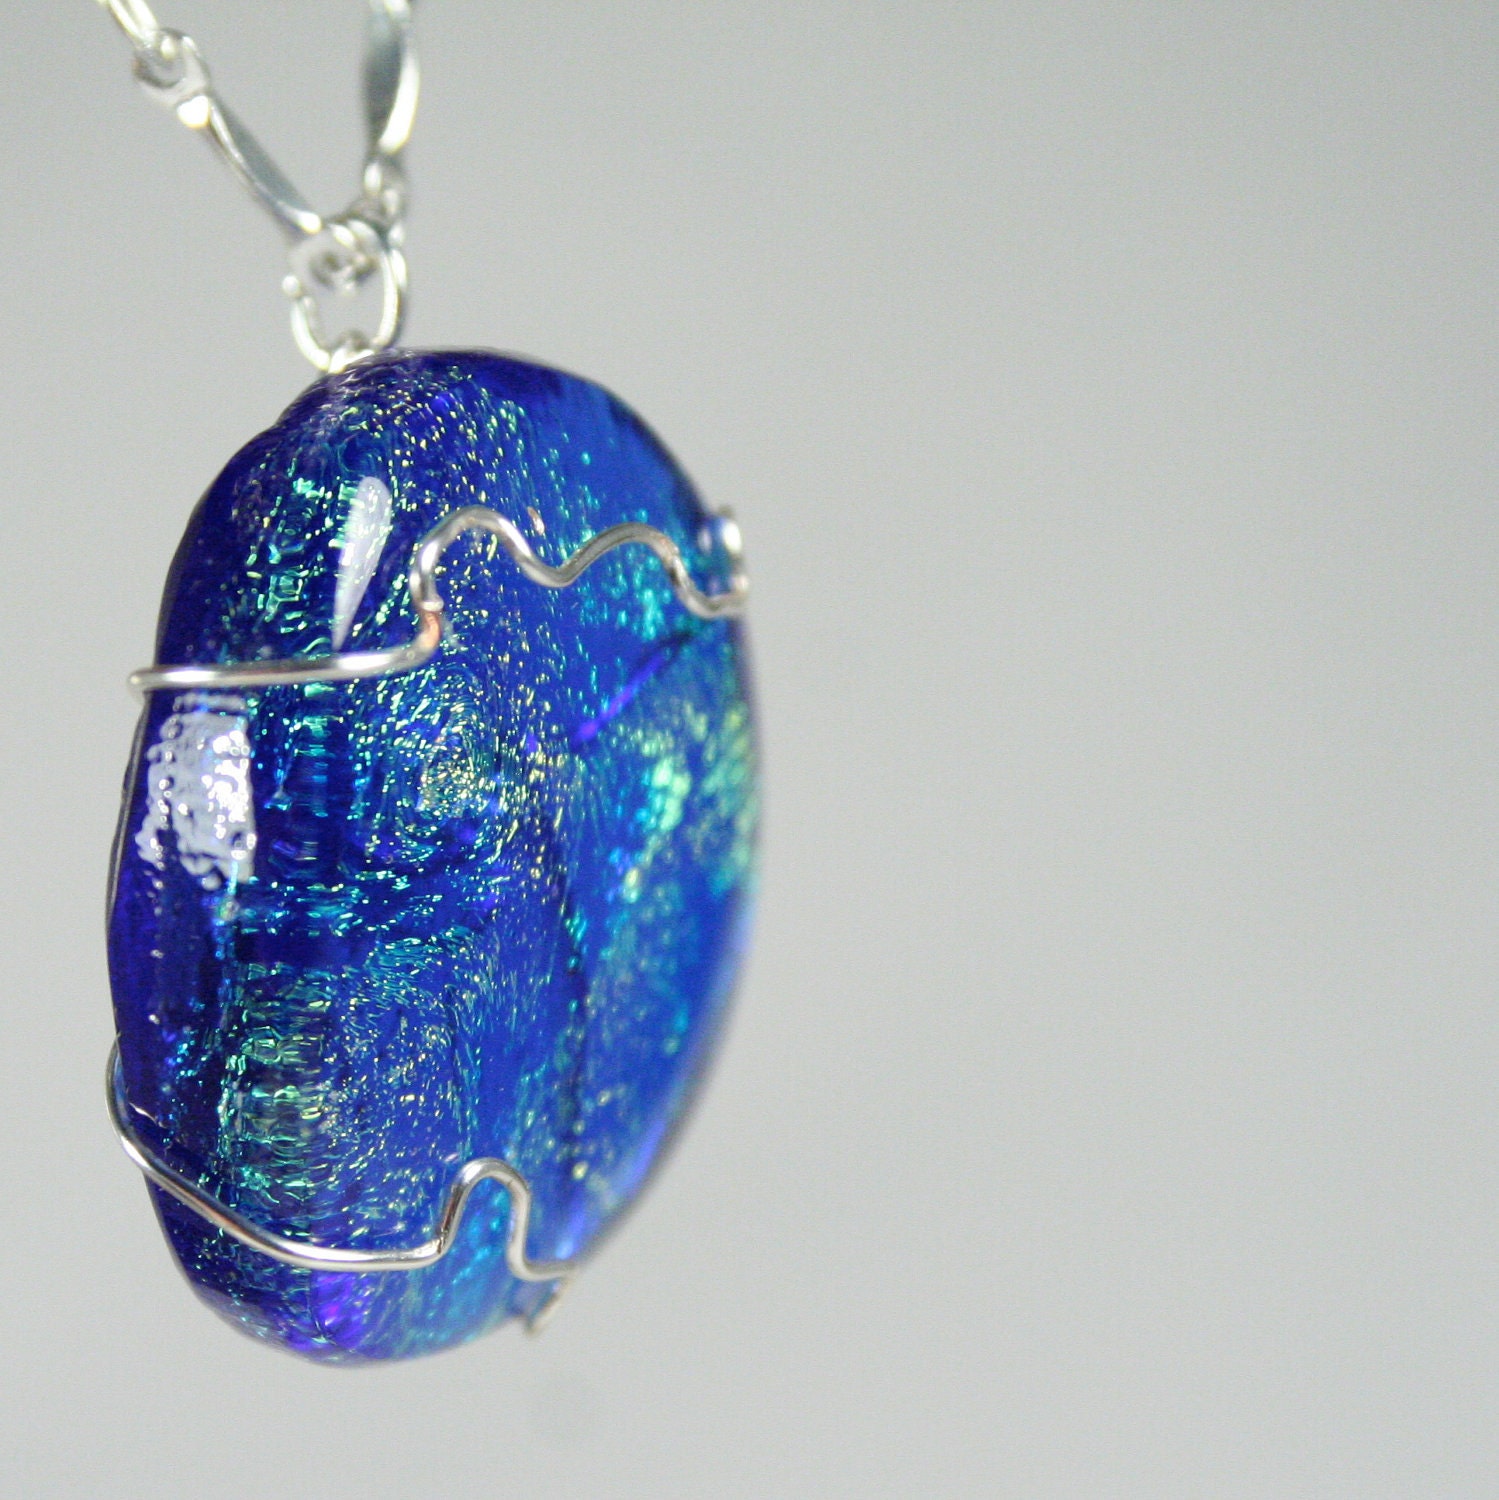 Necklace: Blue dichronic glass wrapped with sterling-filled silver wire